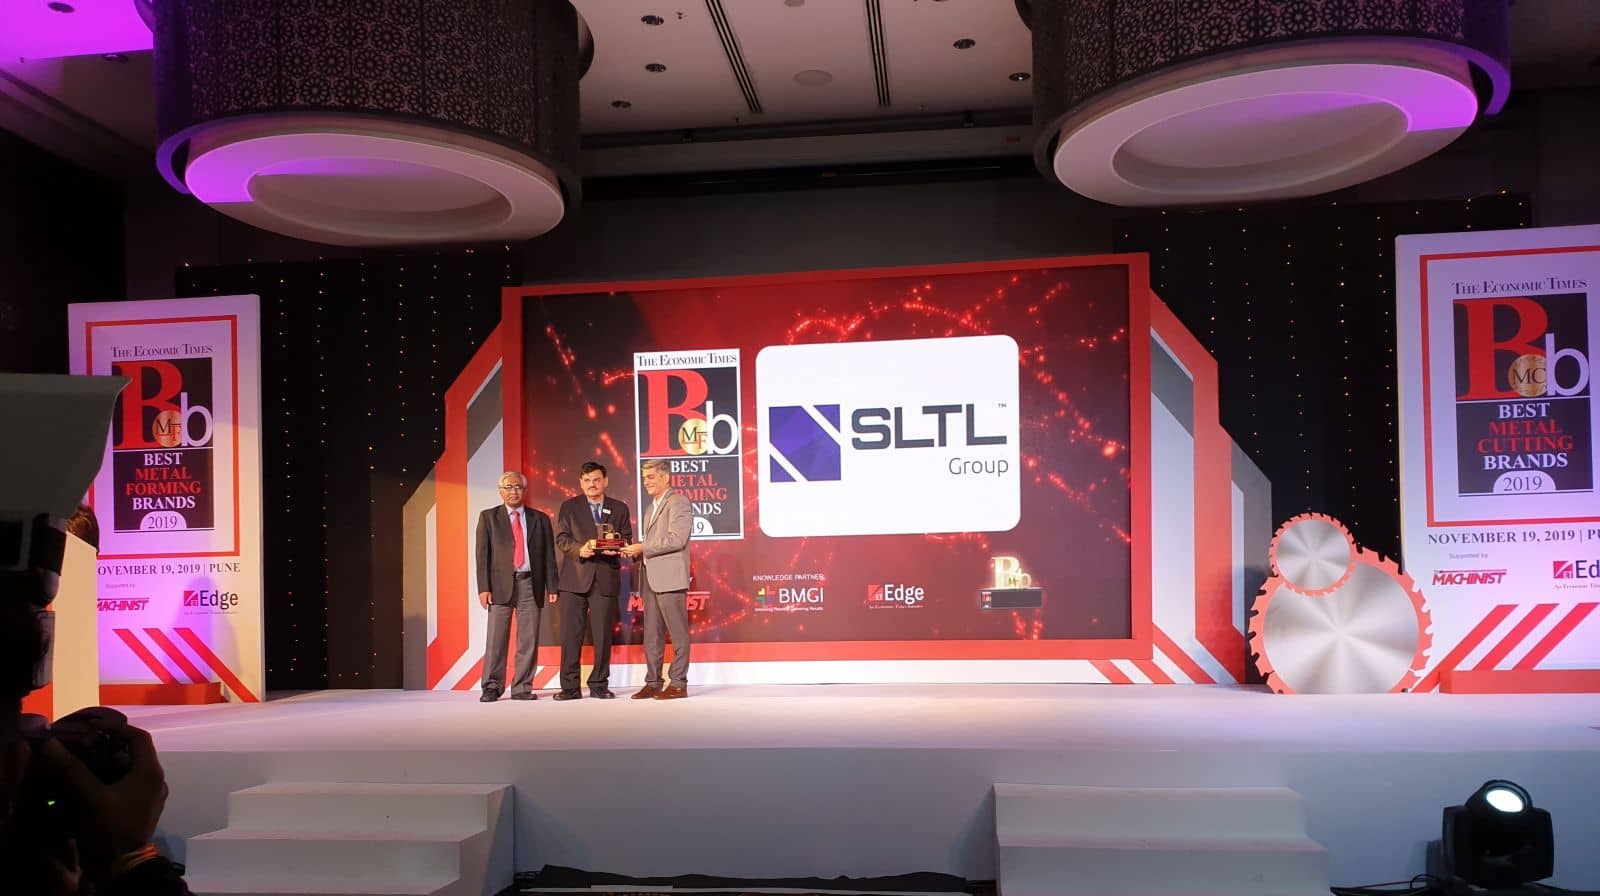 India’s most significant company receives Best Brand Award by the Economic Times